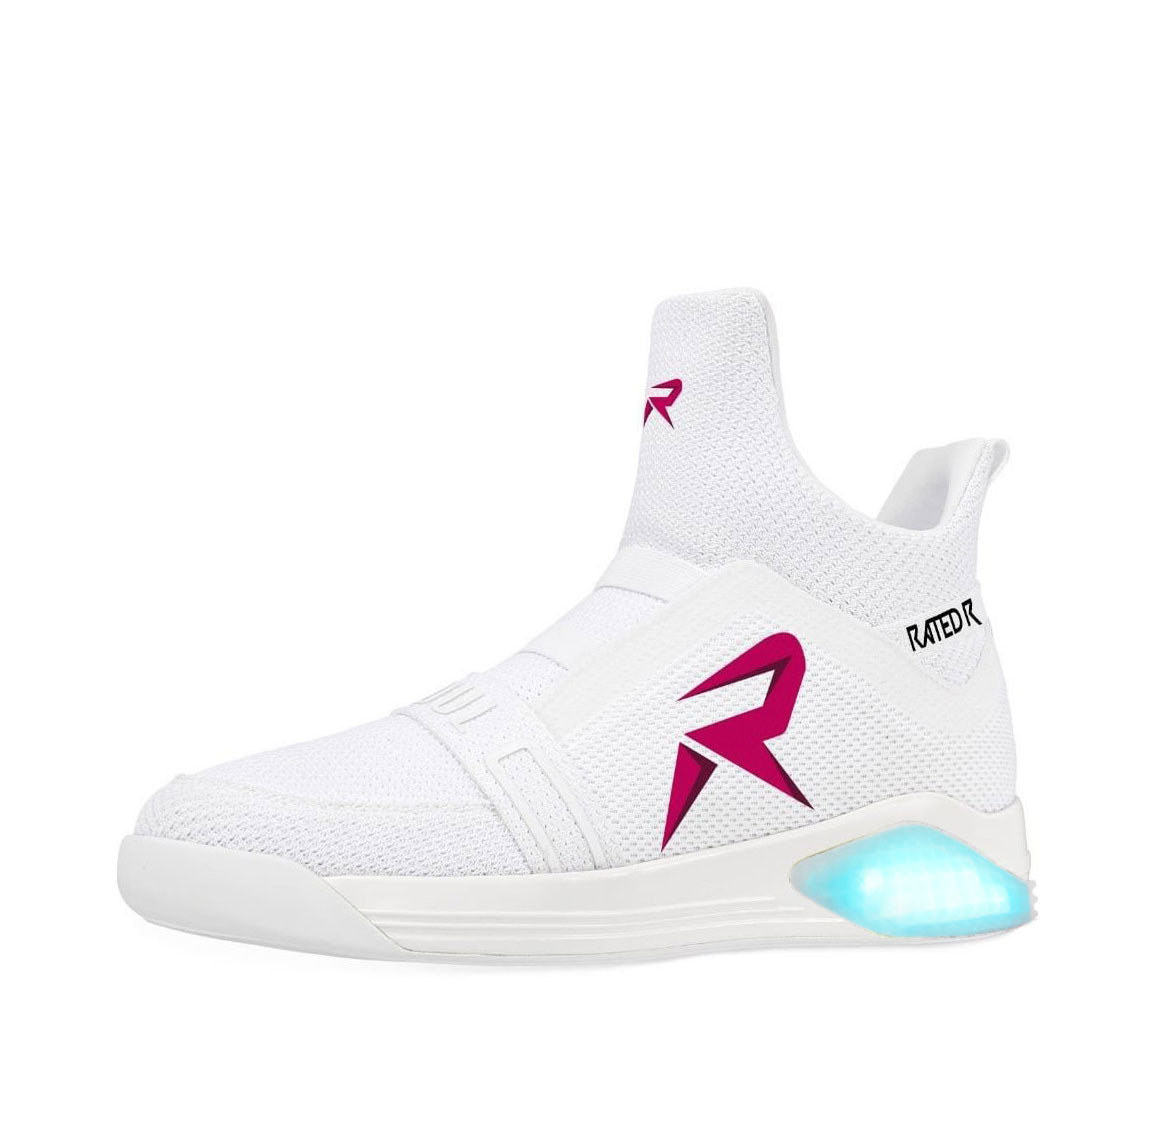 Soulsfeng X Rampage Rated R MPIRE SKYTRACK Lighting Sneaker(White/Black/Red) - Soulsfeng